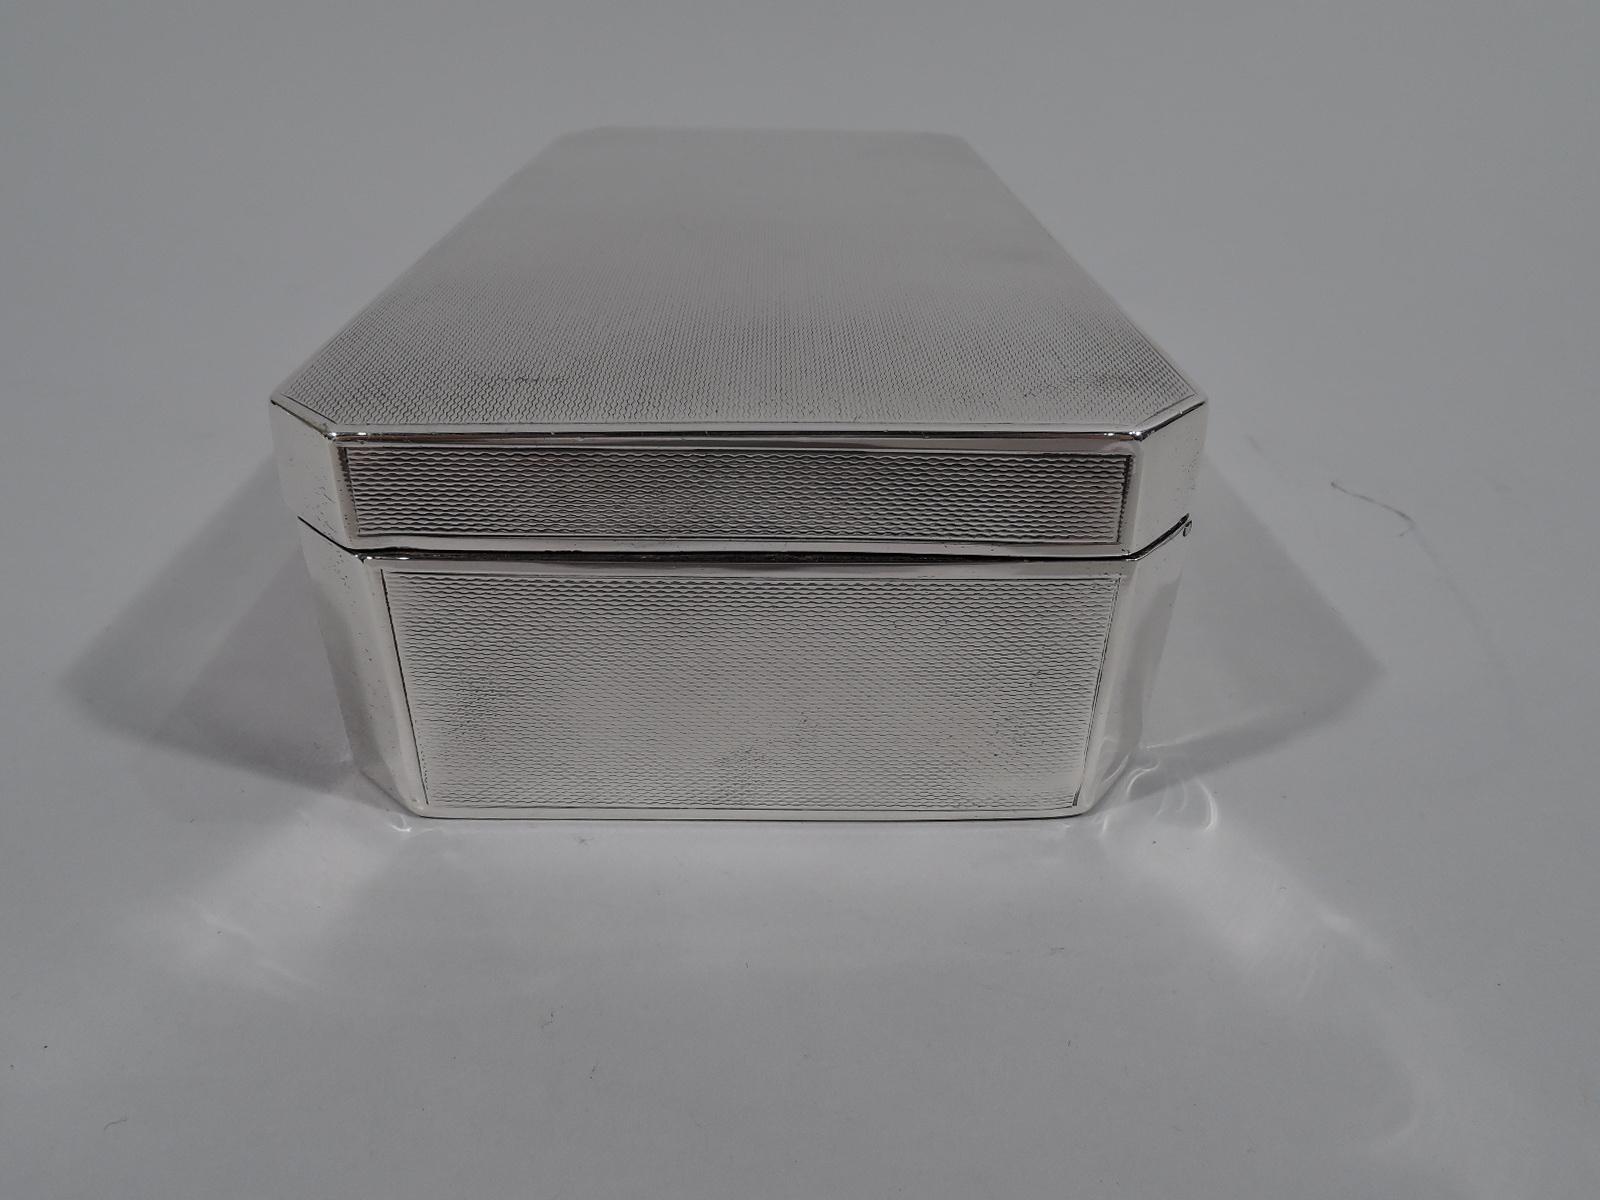 George V sterling silver desk box. Made by John Rose in Birmingham in 1938. Rectangular with chamfered corners and hinged and tabbed cover. All-over engine-turned wave ornament except for rectangular mono plate (vacant) on box front and corners. Box